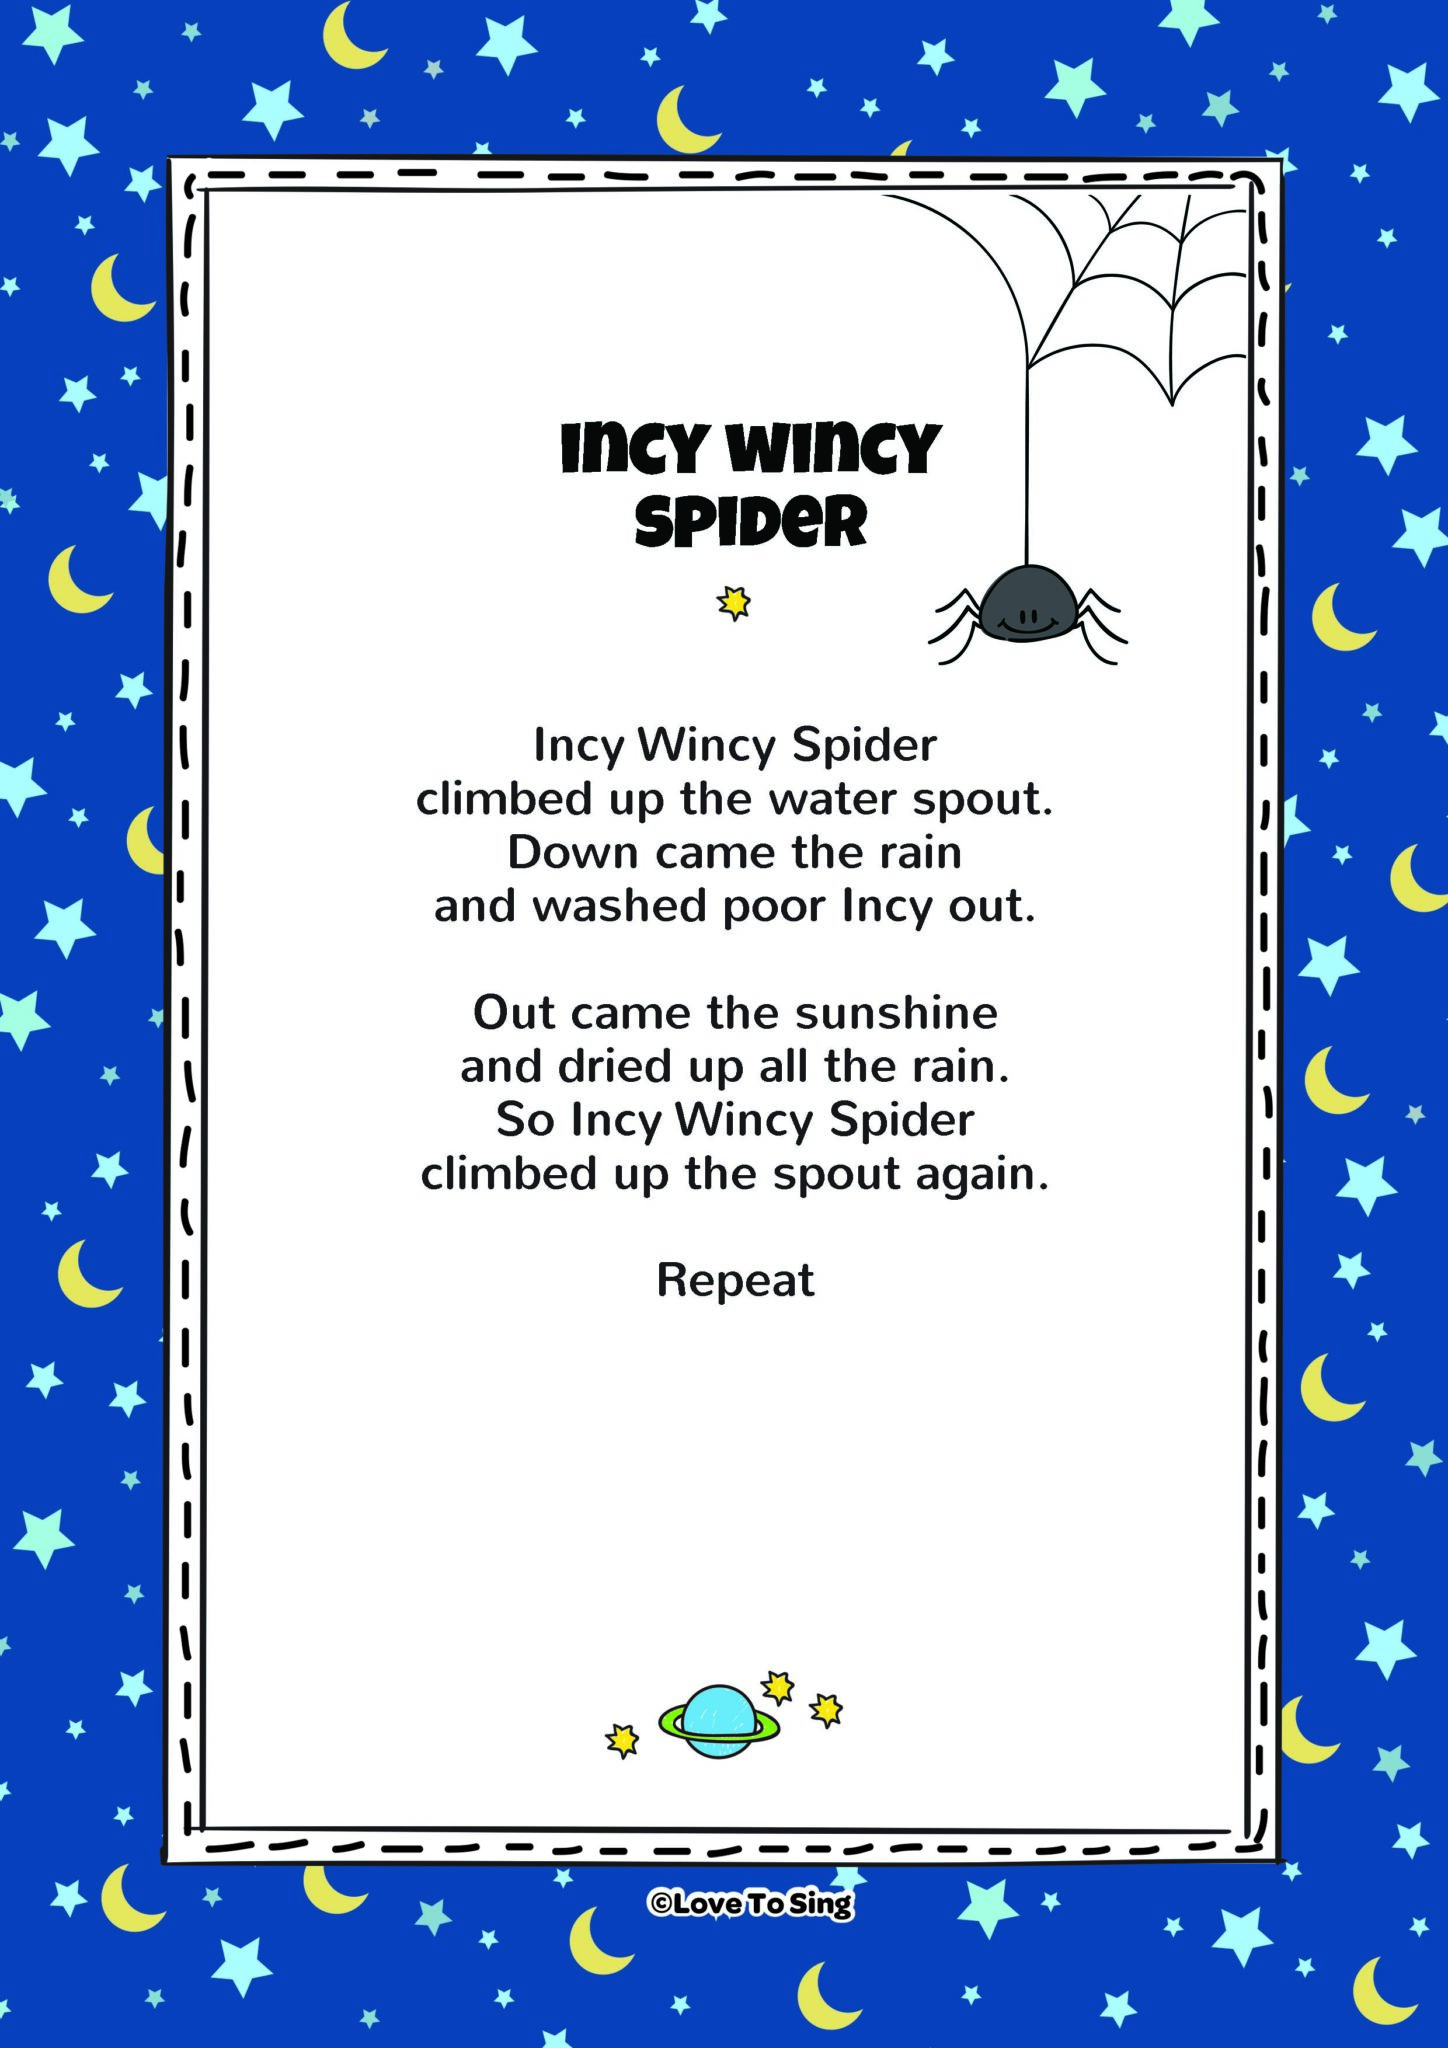 What is the meaning behind Incy Wincy Spider, and what are the